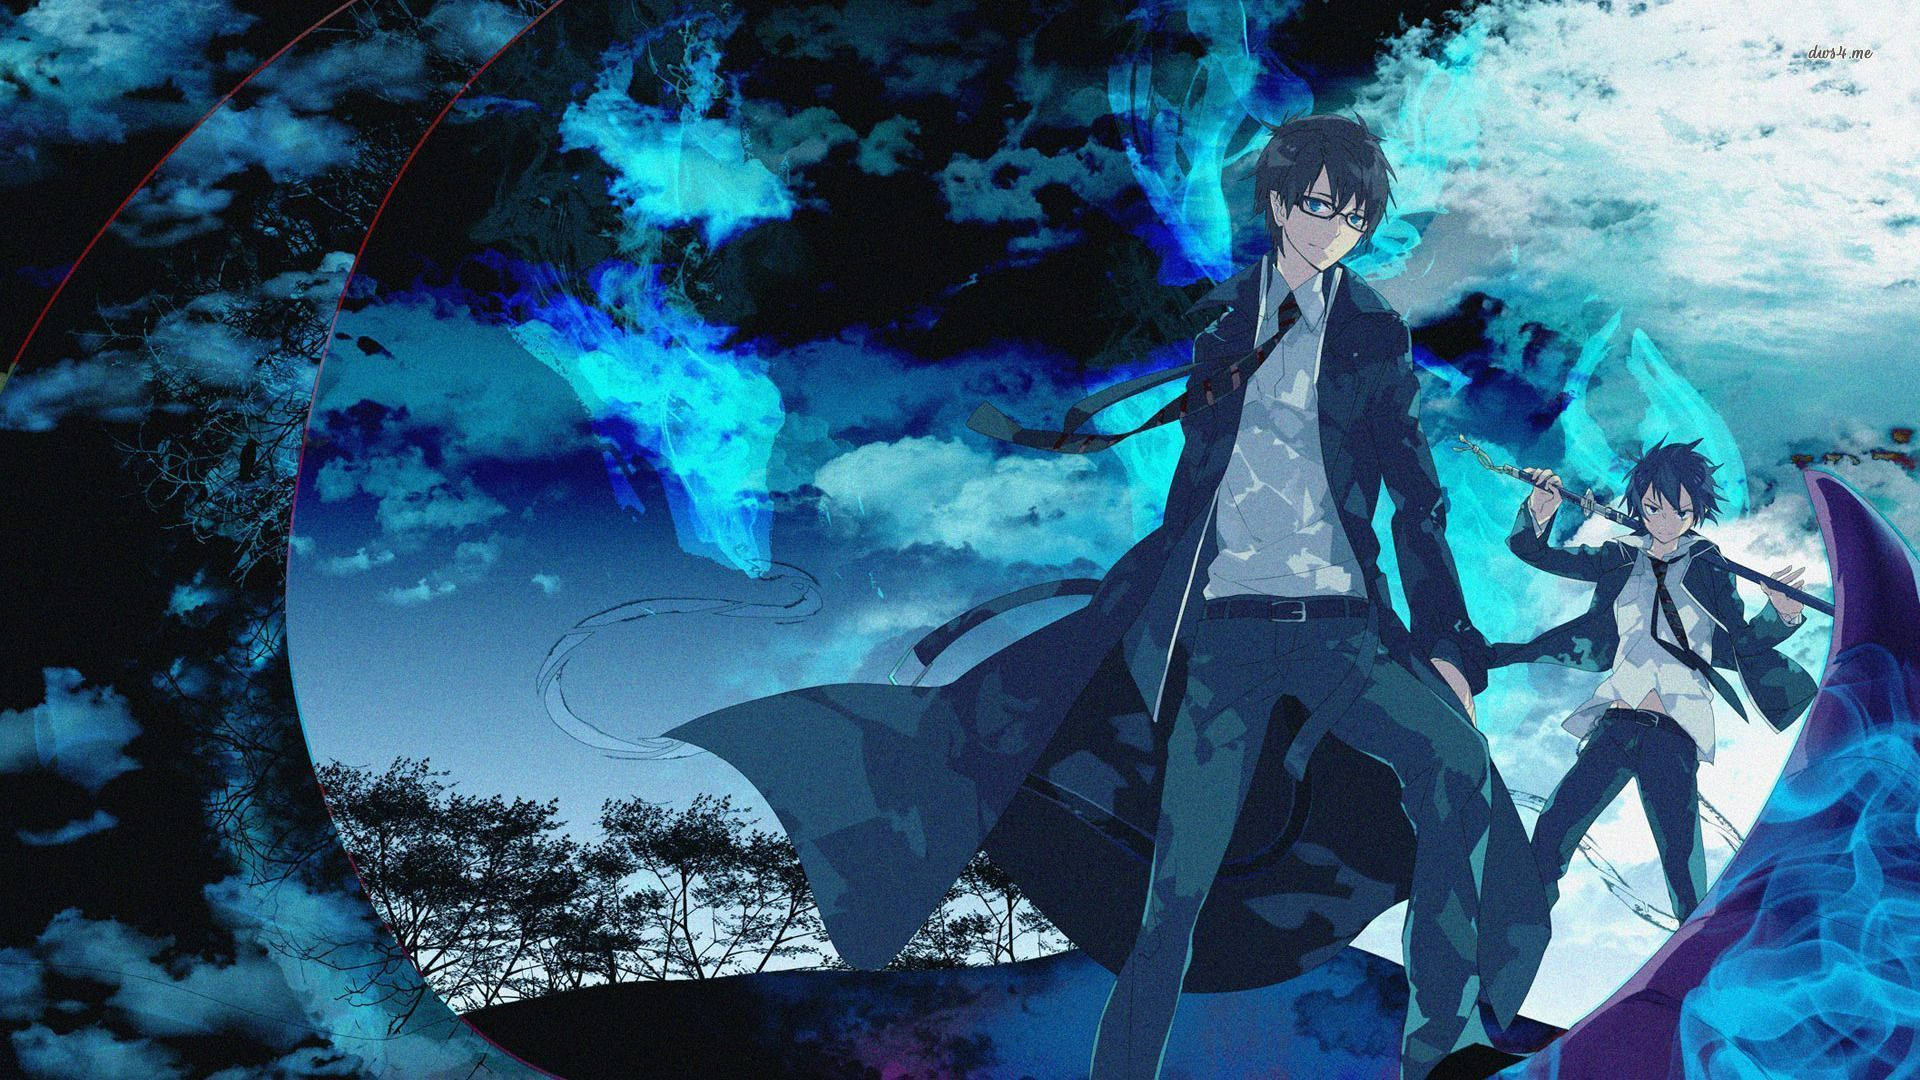 Blue Anime with man on glasses and a boy with big axe.